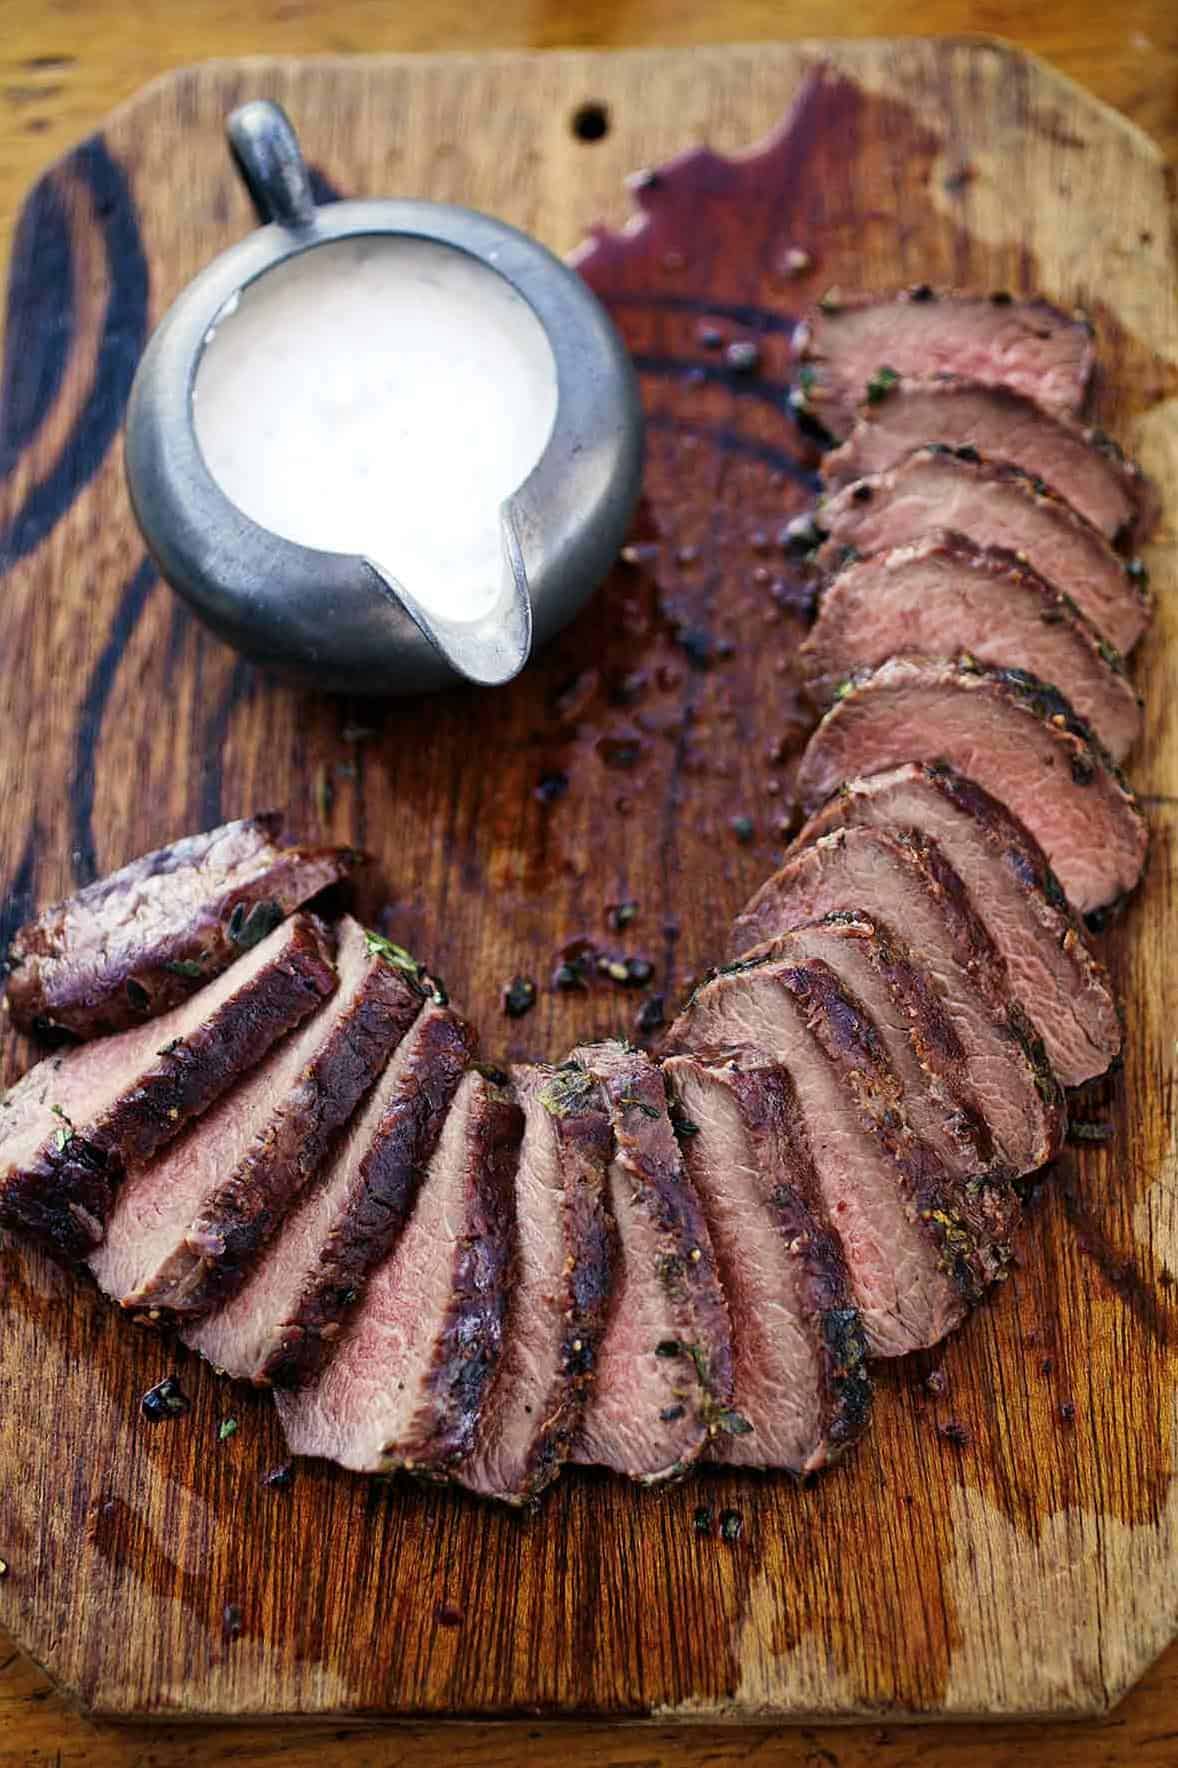  The classic BBQ dish gets an elevated twist with venison tenderloin.